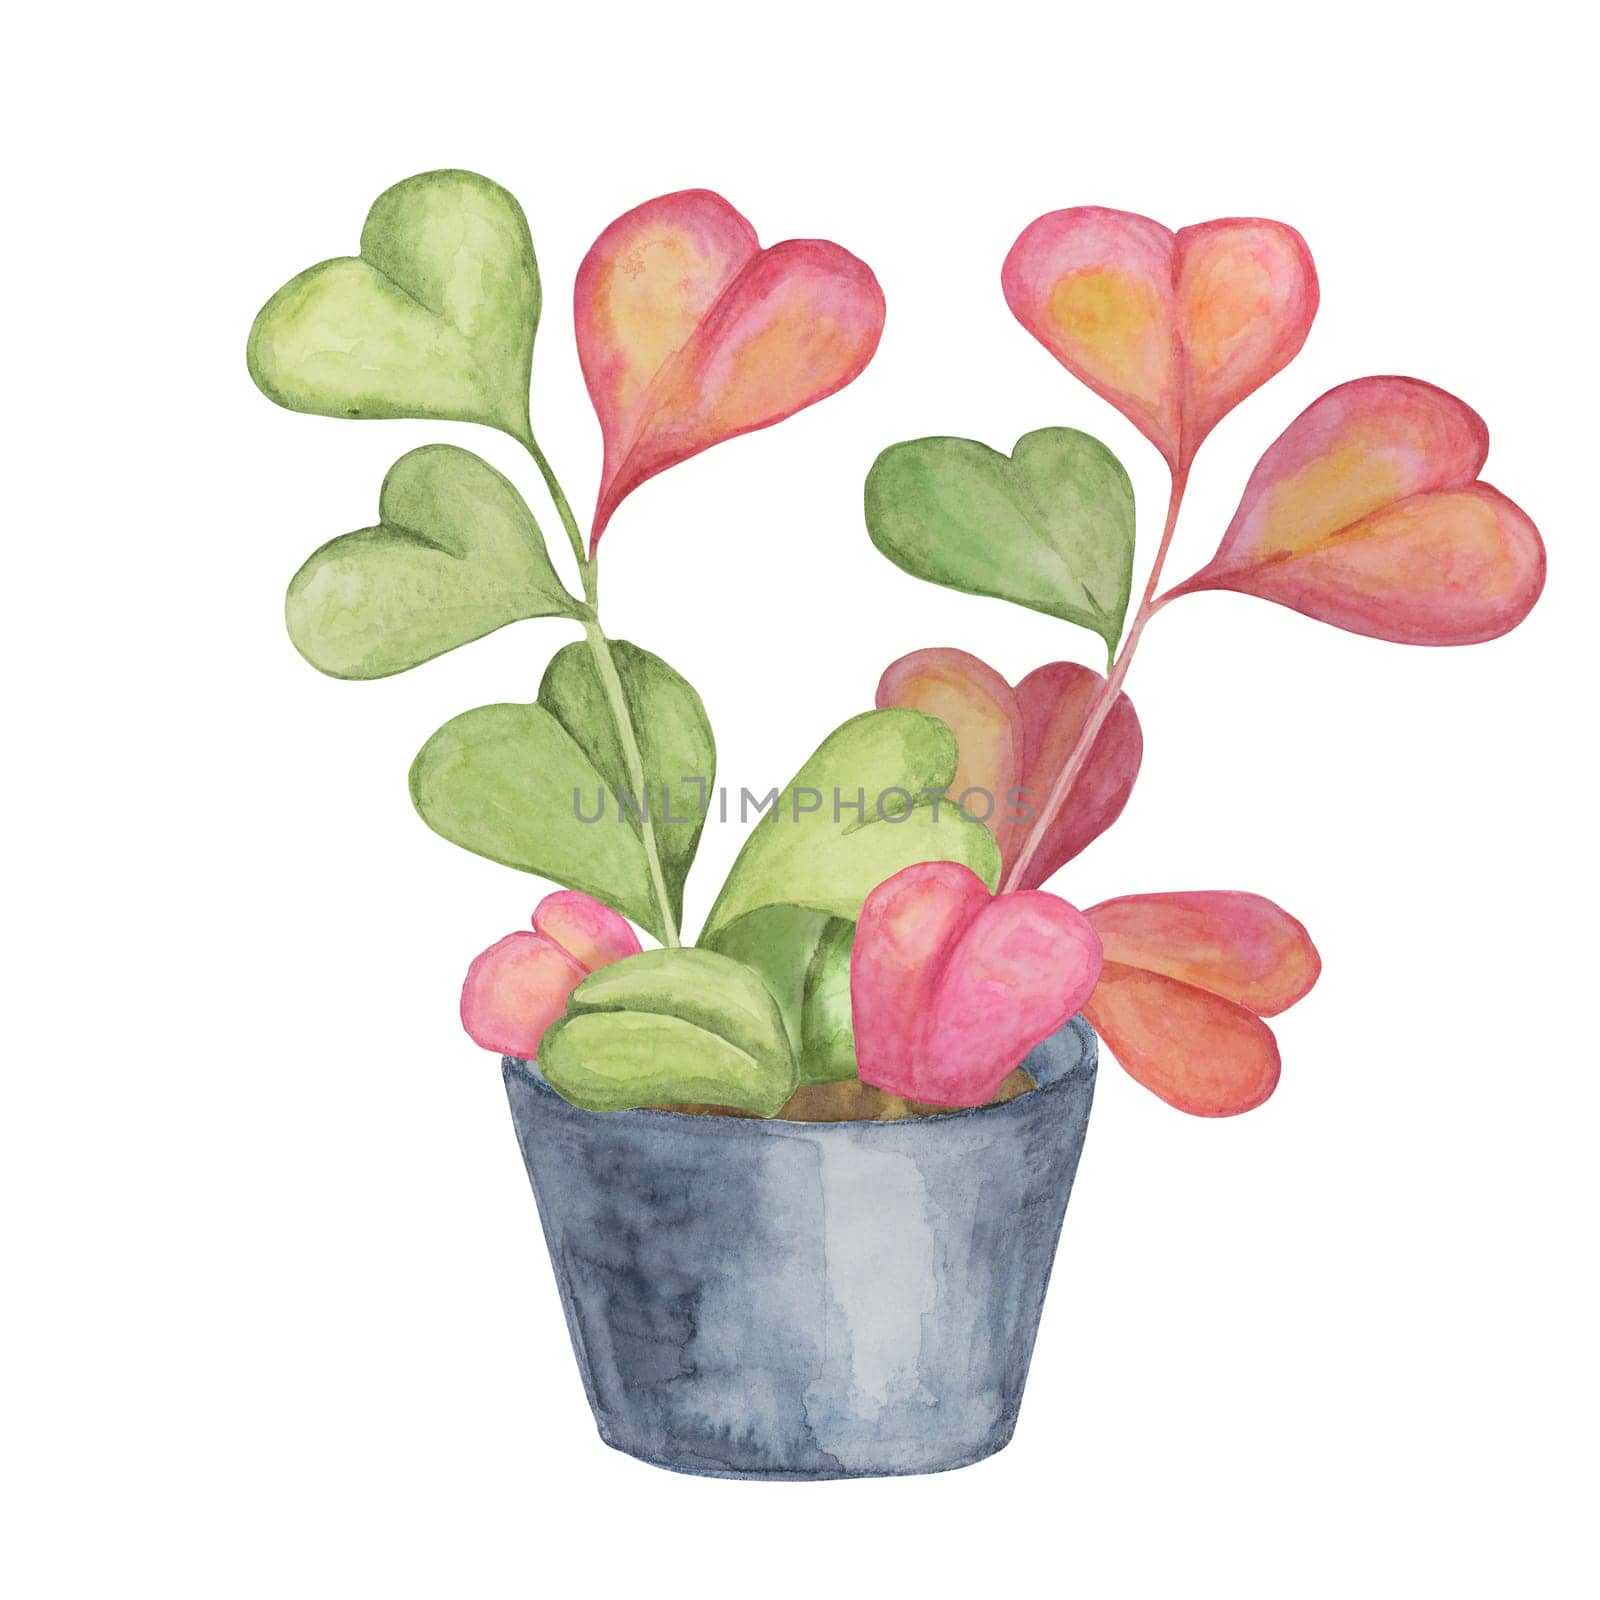 Two hoya kerrii plants in watercolor by Fofito